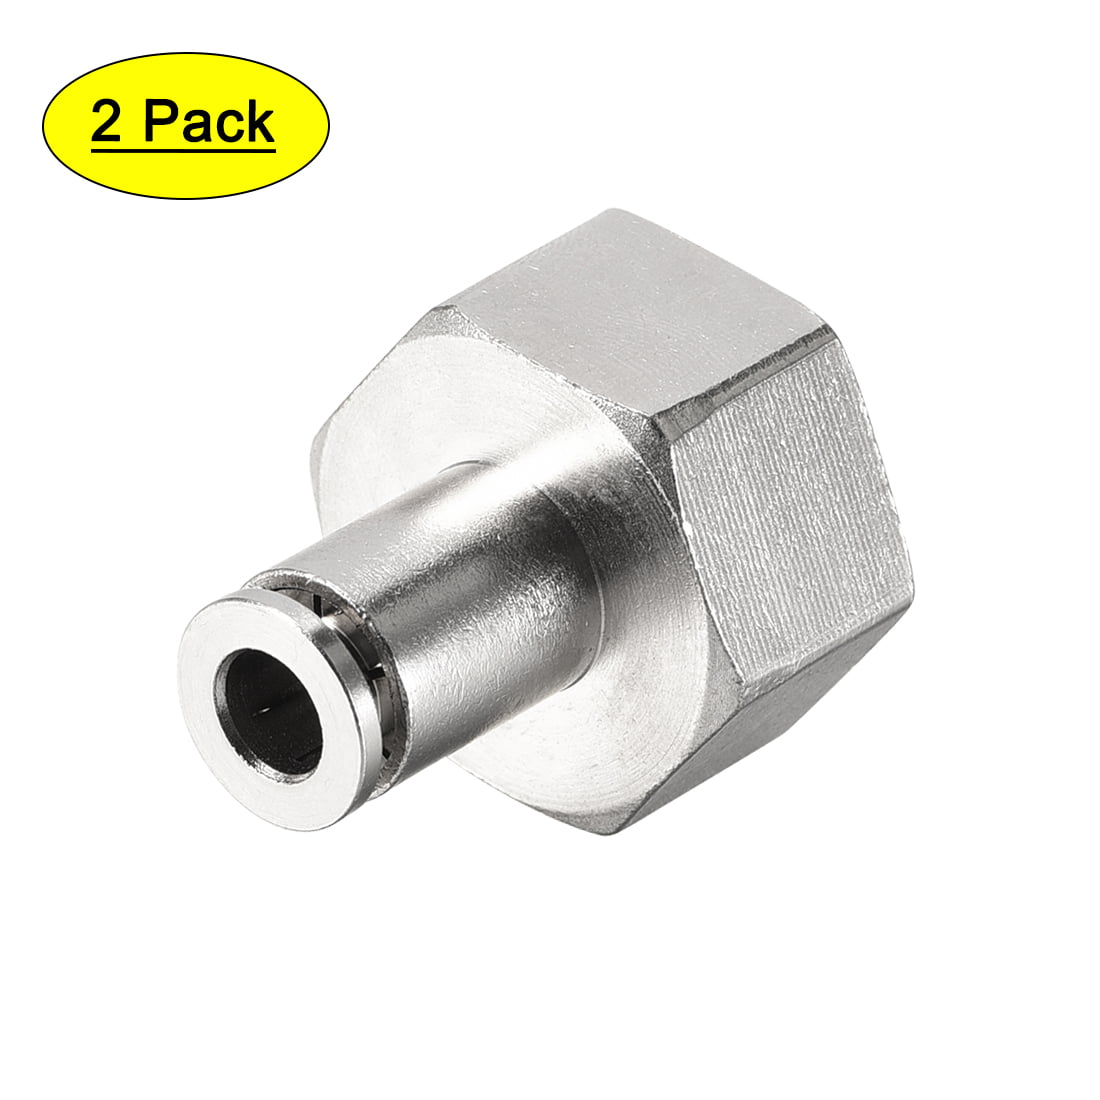 2pcs Push Connector 6MM 1/4 Inch OD Air Fitting Parts Replacement Useful 